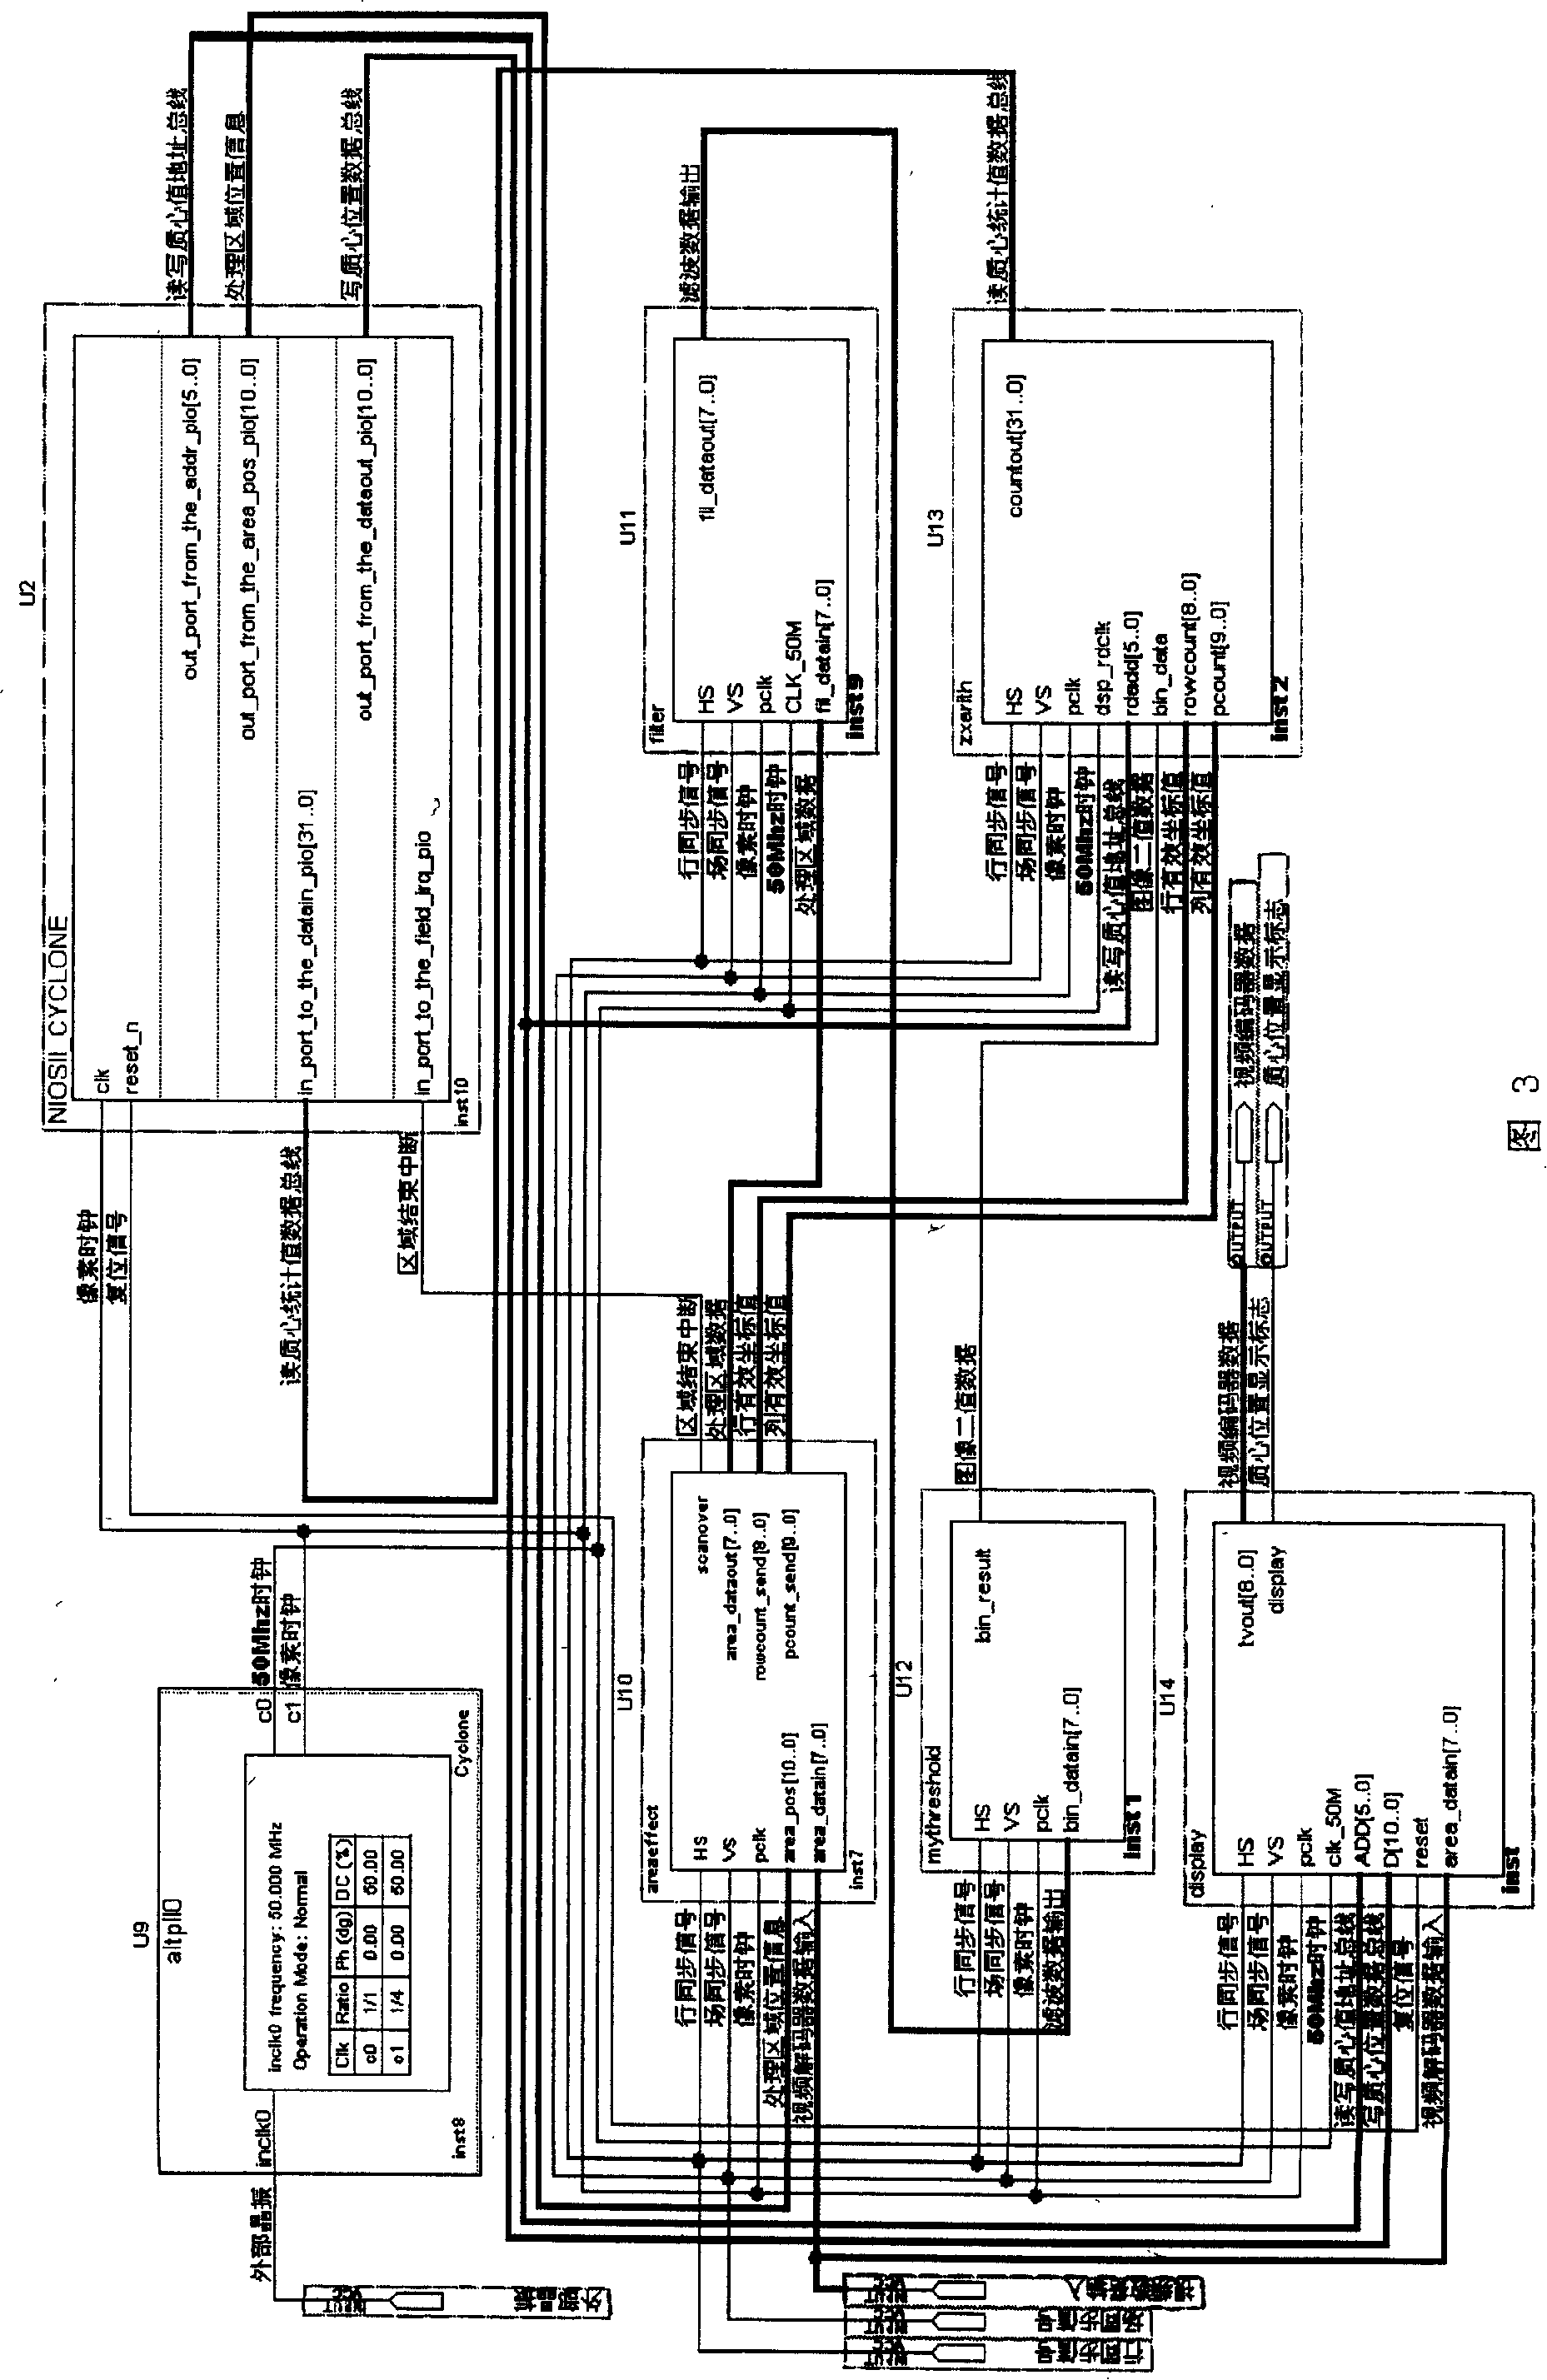 An image centroid computing method and implementation device